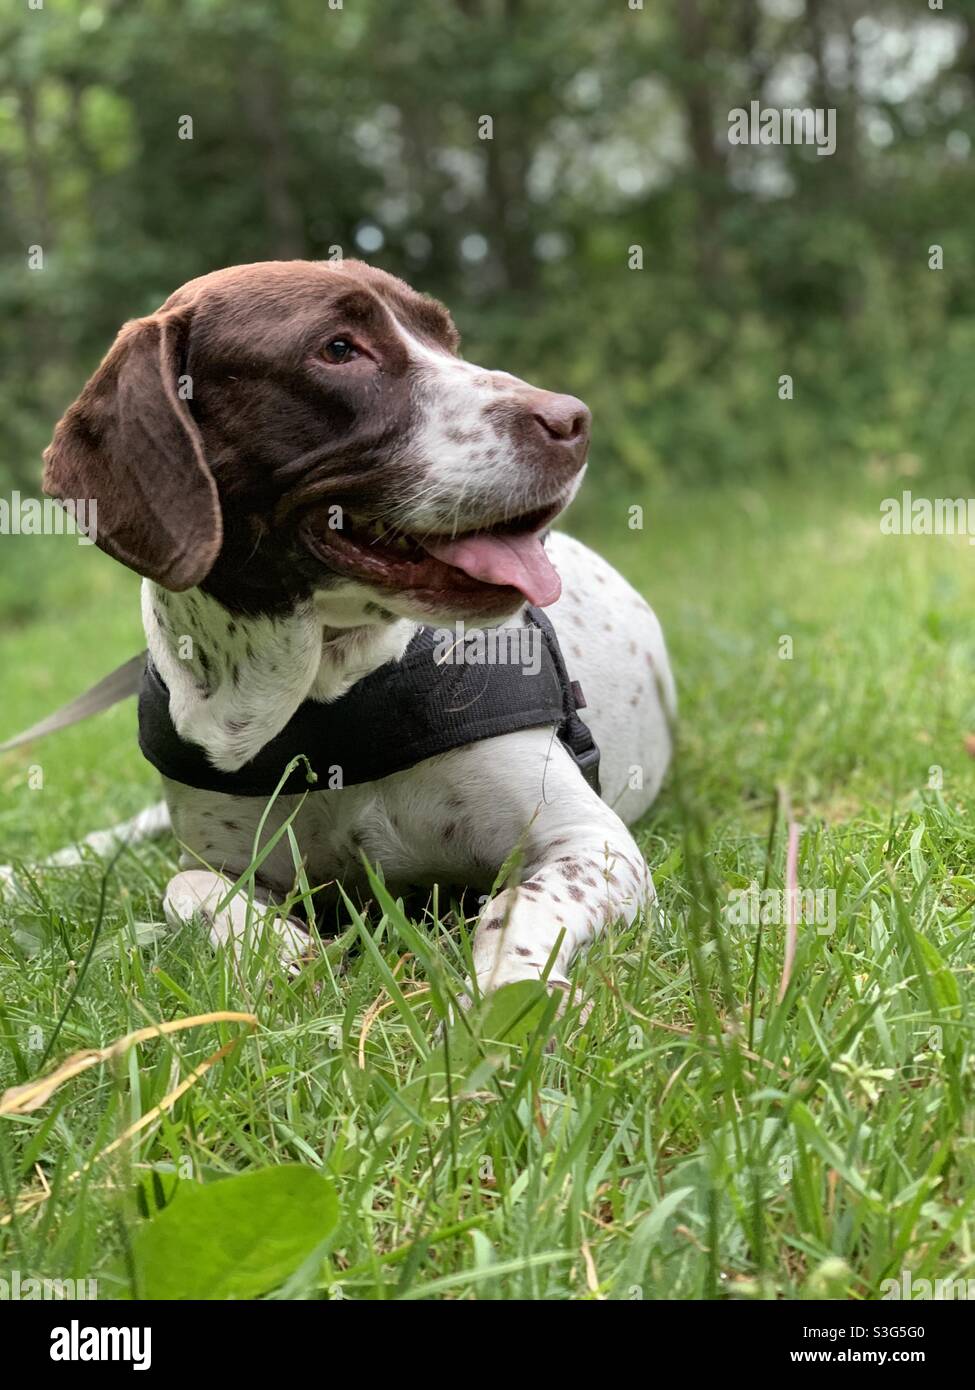 Olddanish pointer dog in a leash lay in Long grass Stock Photo